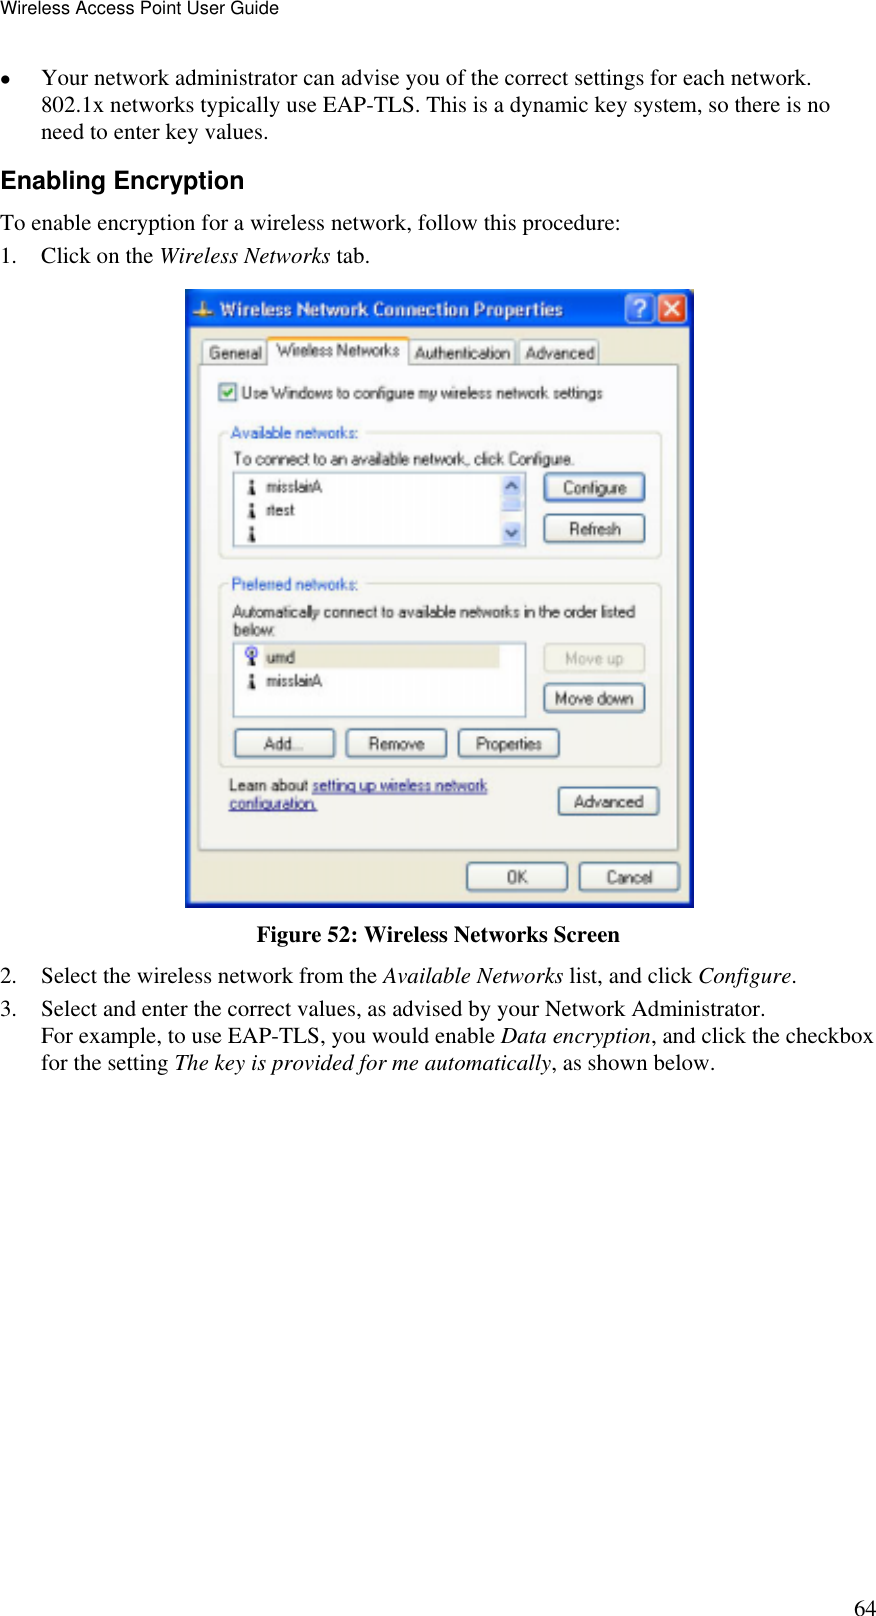 Wireless Access Point User Guide 64 •  Your network administrator can advise you of the correct settings for each network. 802.1x networks typically use EAP-TLS. This is a dynamic key system, so there is no need to enter key values. Enabling Encryption To enable encryption for a wireless network, follow this procedure: 1.  Click on the Wireless Networks tab.  Figure 52: Wireless Networks Screen 2.  Select the wireless network from the Available Networks list, and click Configure. 3.  Select and enter the correct values, as advised by your Network Administrator. For example, to use EAP-TLS, you would enable Data encryption, and click the checkbox for the setting The key is provided for me automatically, as shown below. 